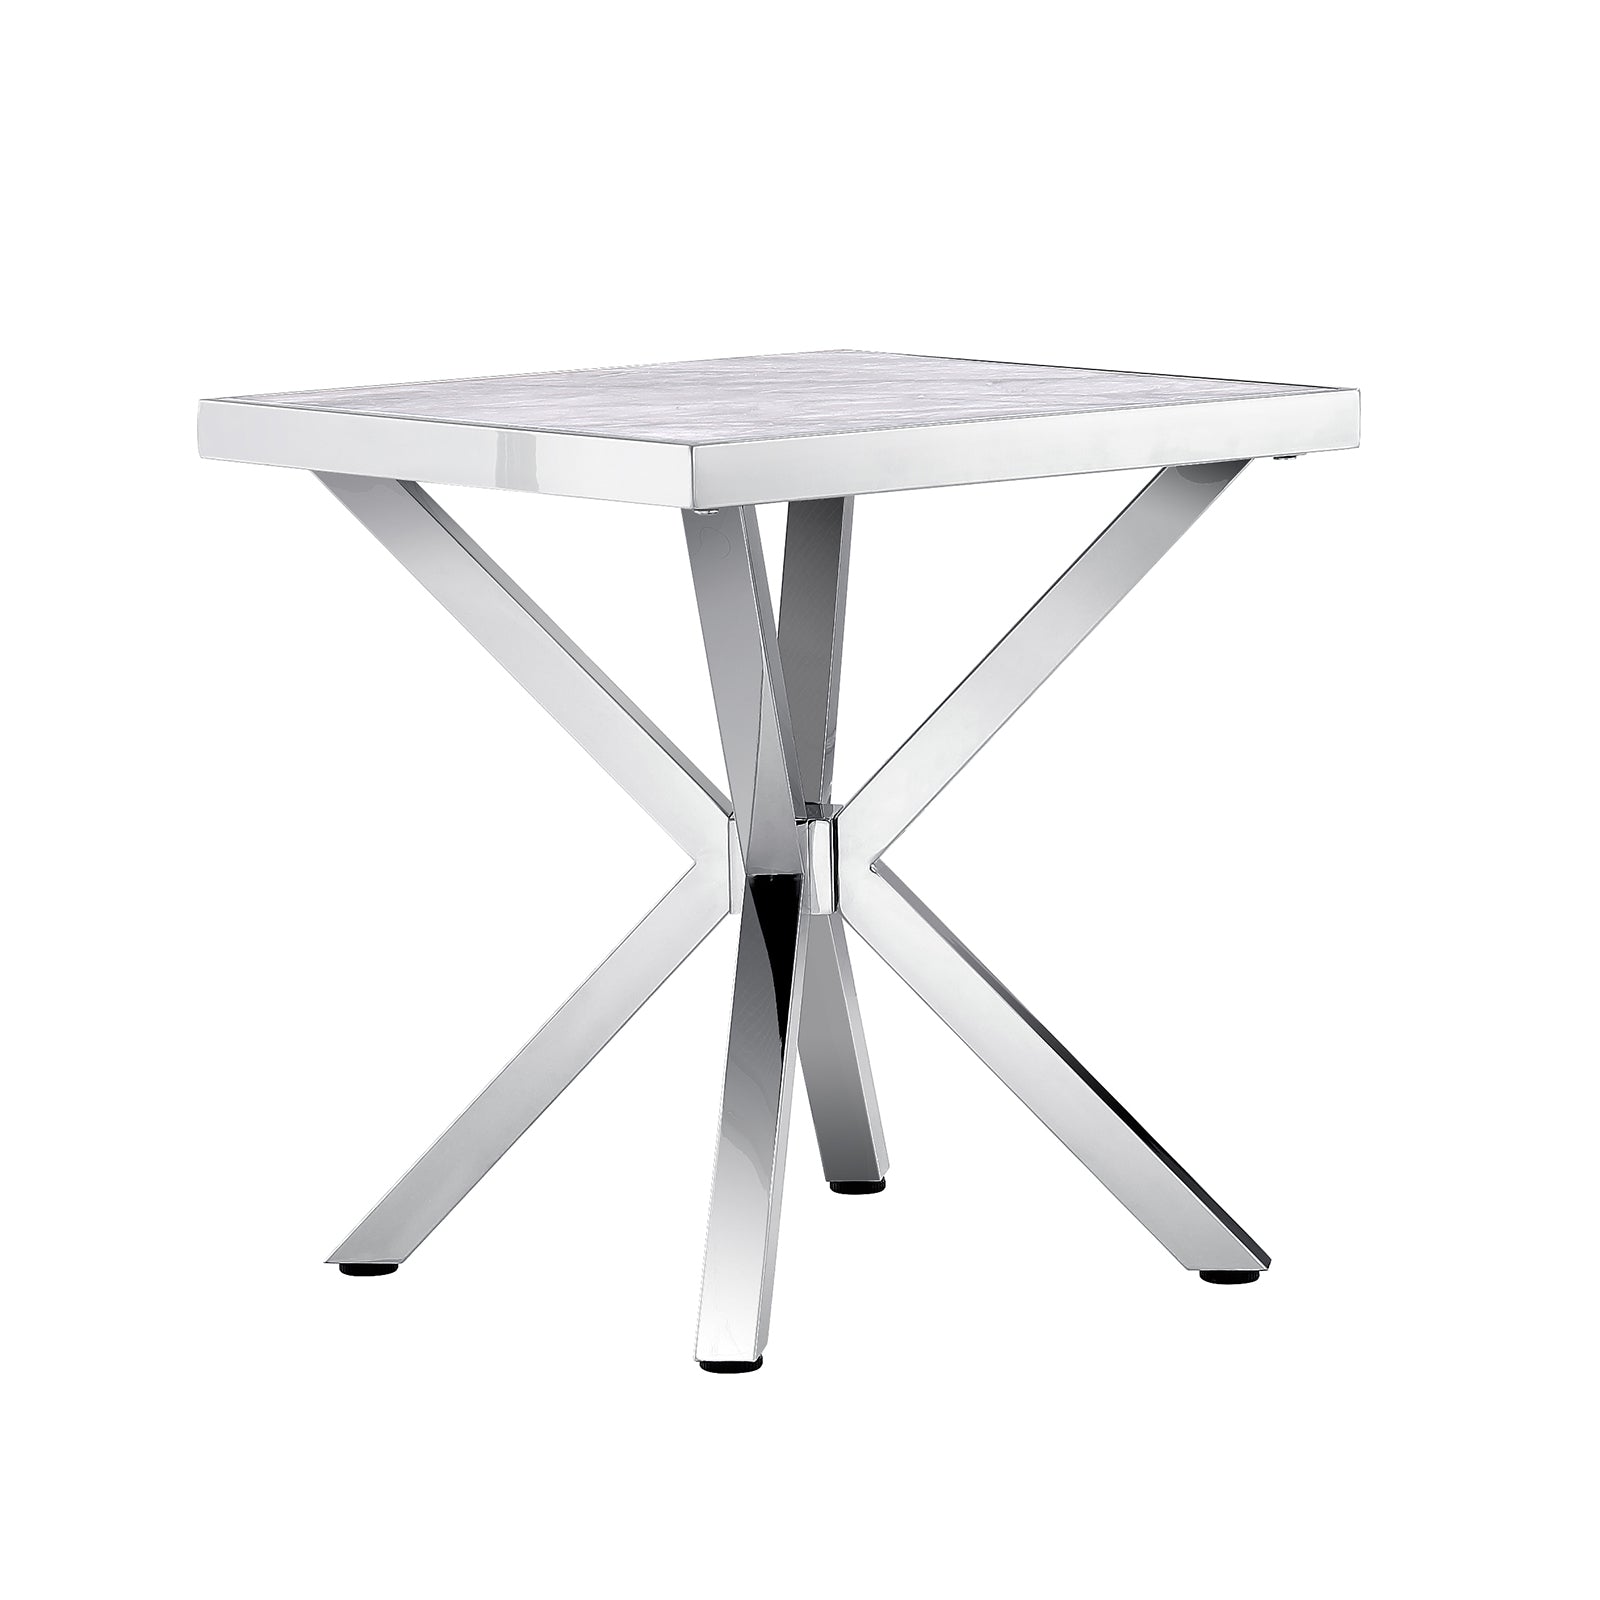 The Silver End Table: A Stylish and Space-Saving Addition to Your Home